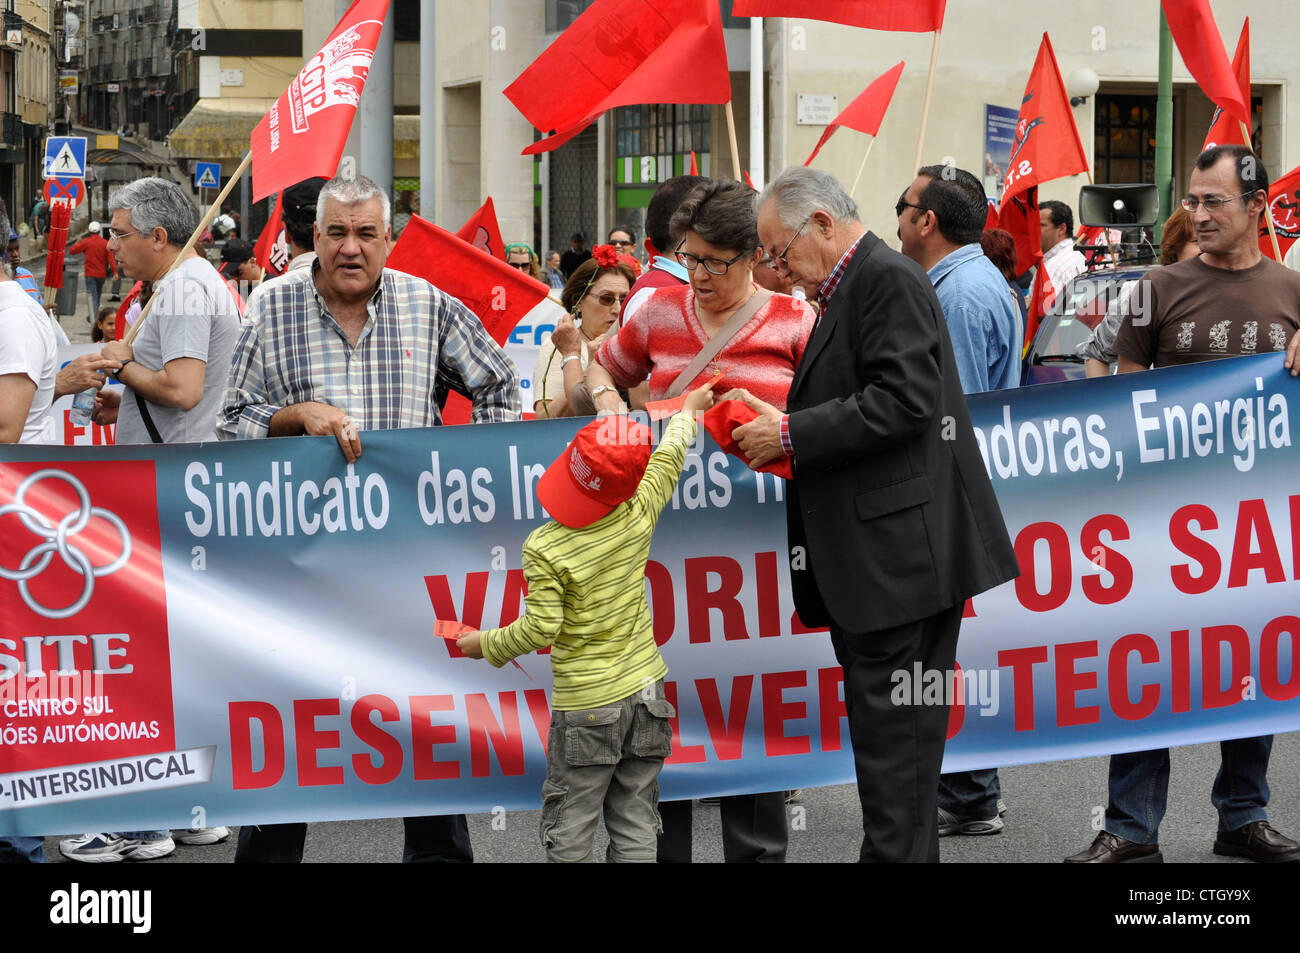 1.Mai - Workers' Day Demonstration in Lissabon, Portugal Stockfoto